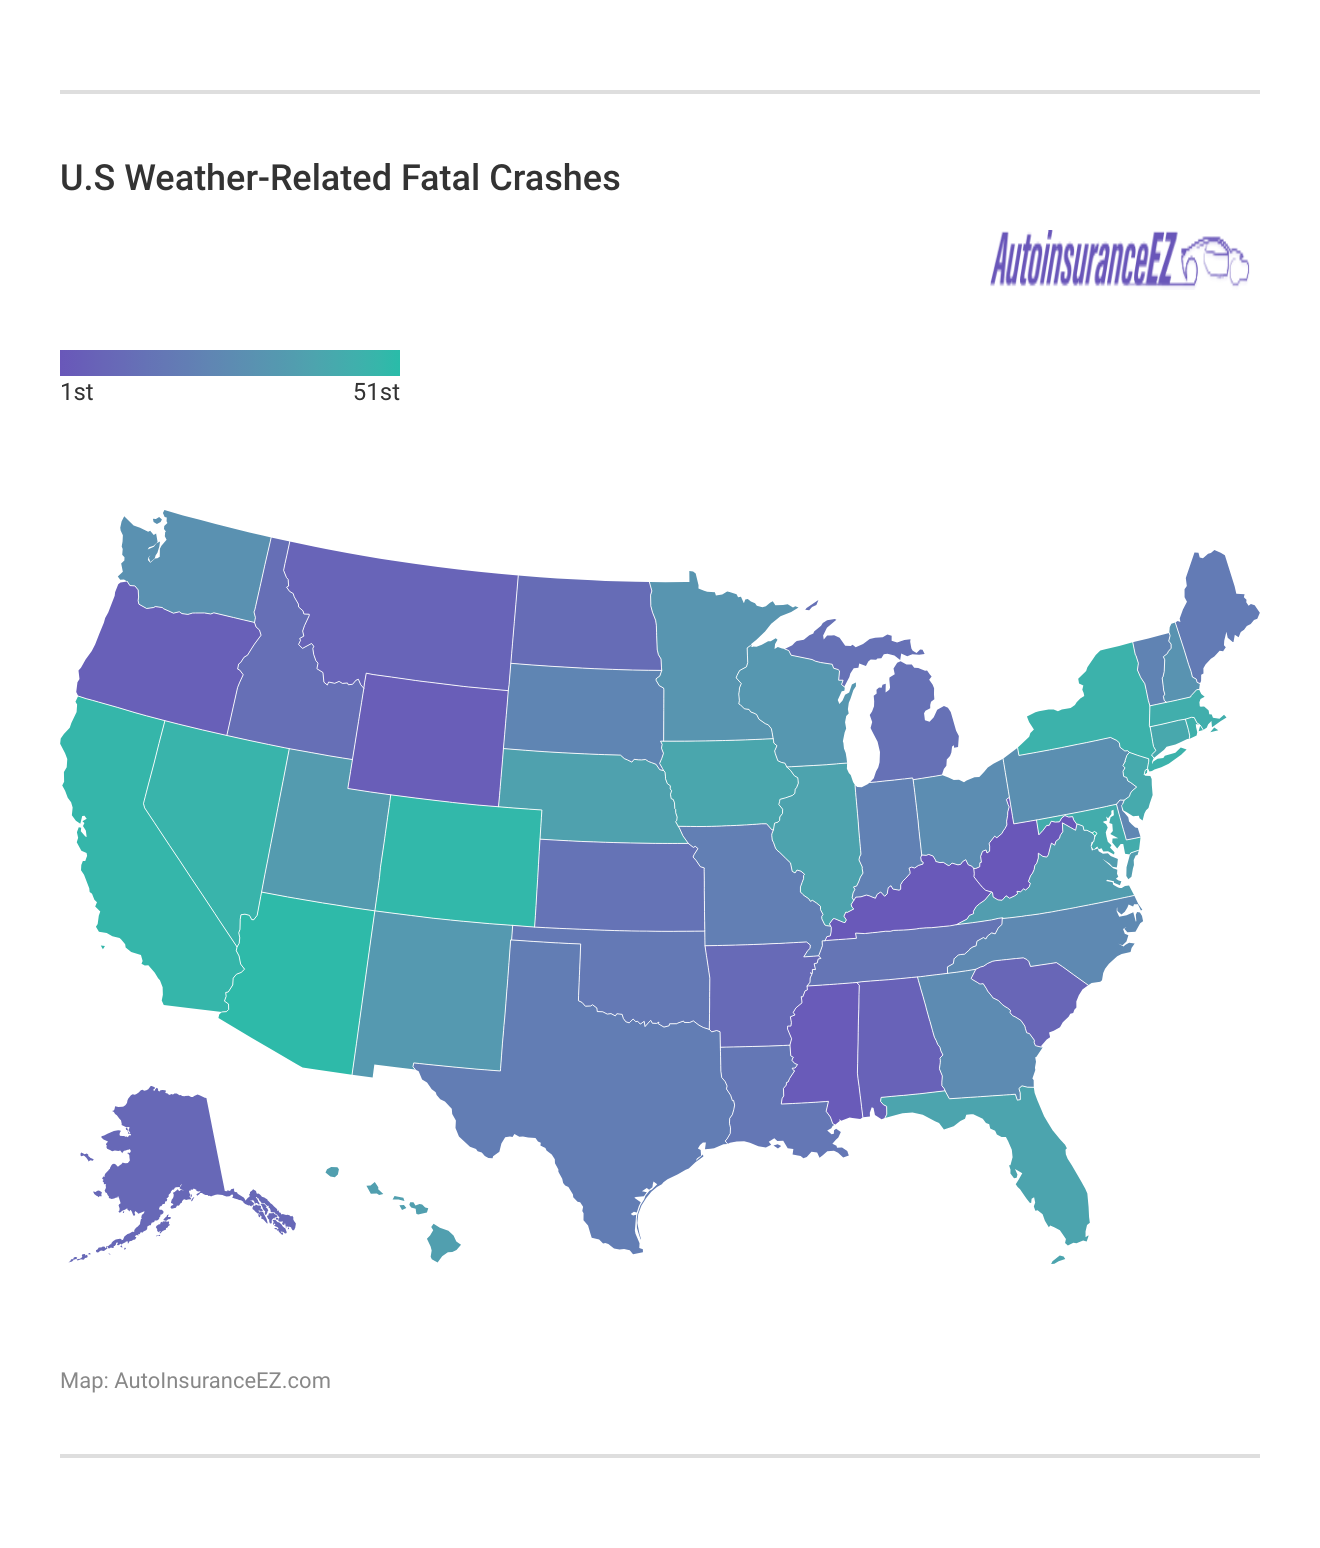 <h3>U.S Weather-Related Fatal Crashes</h3>